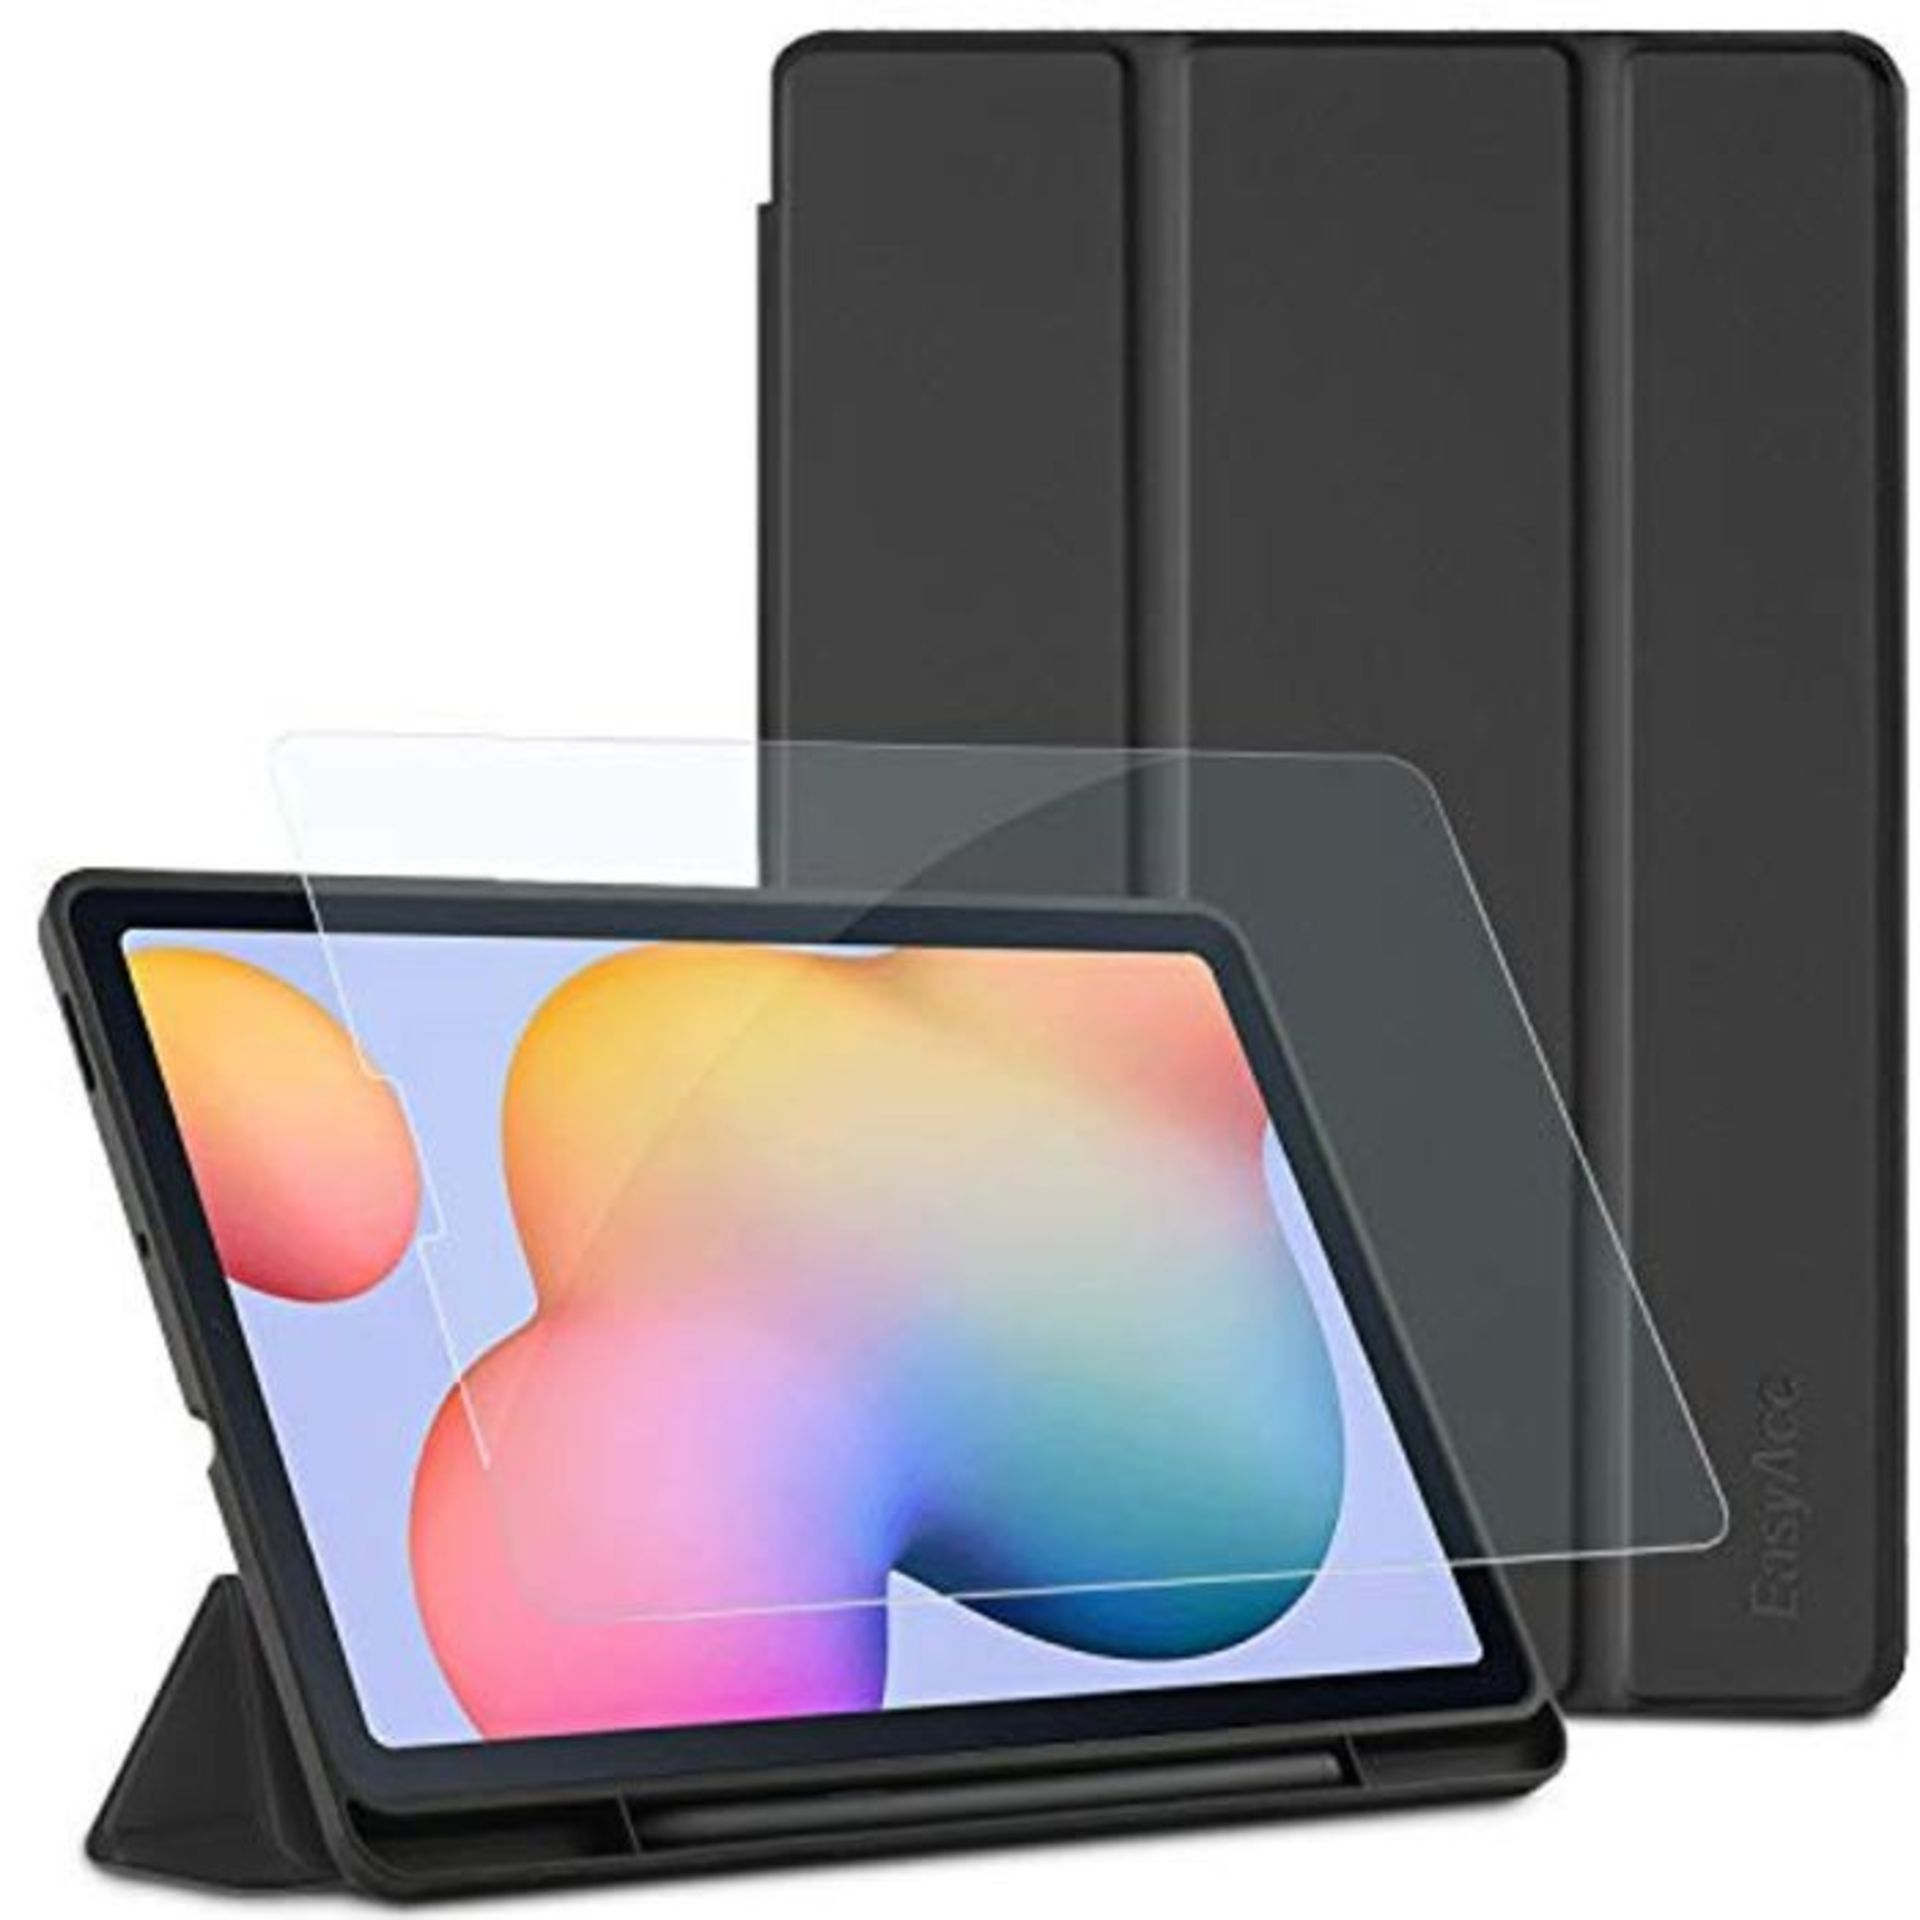 EasyAcc for Samsung Galaxy Tab S6 Lite 2020 case - Ultra thin with stand function Slim - Image 3 of 4